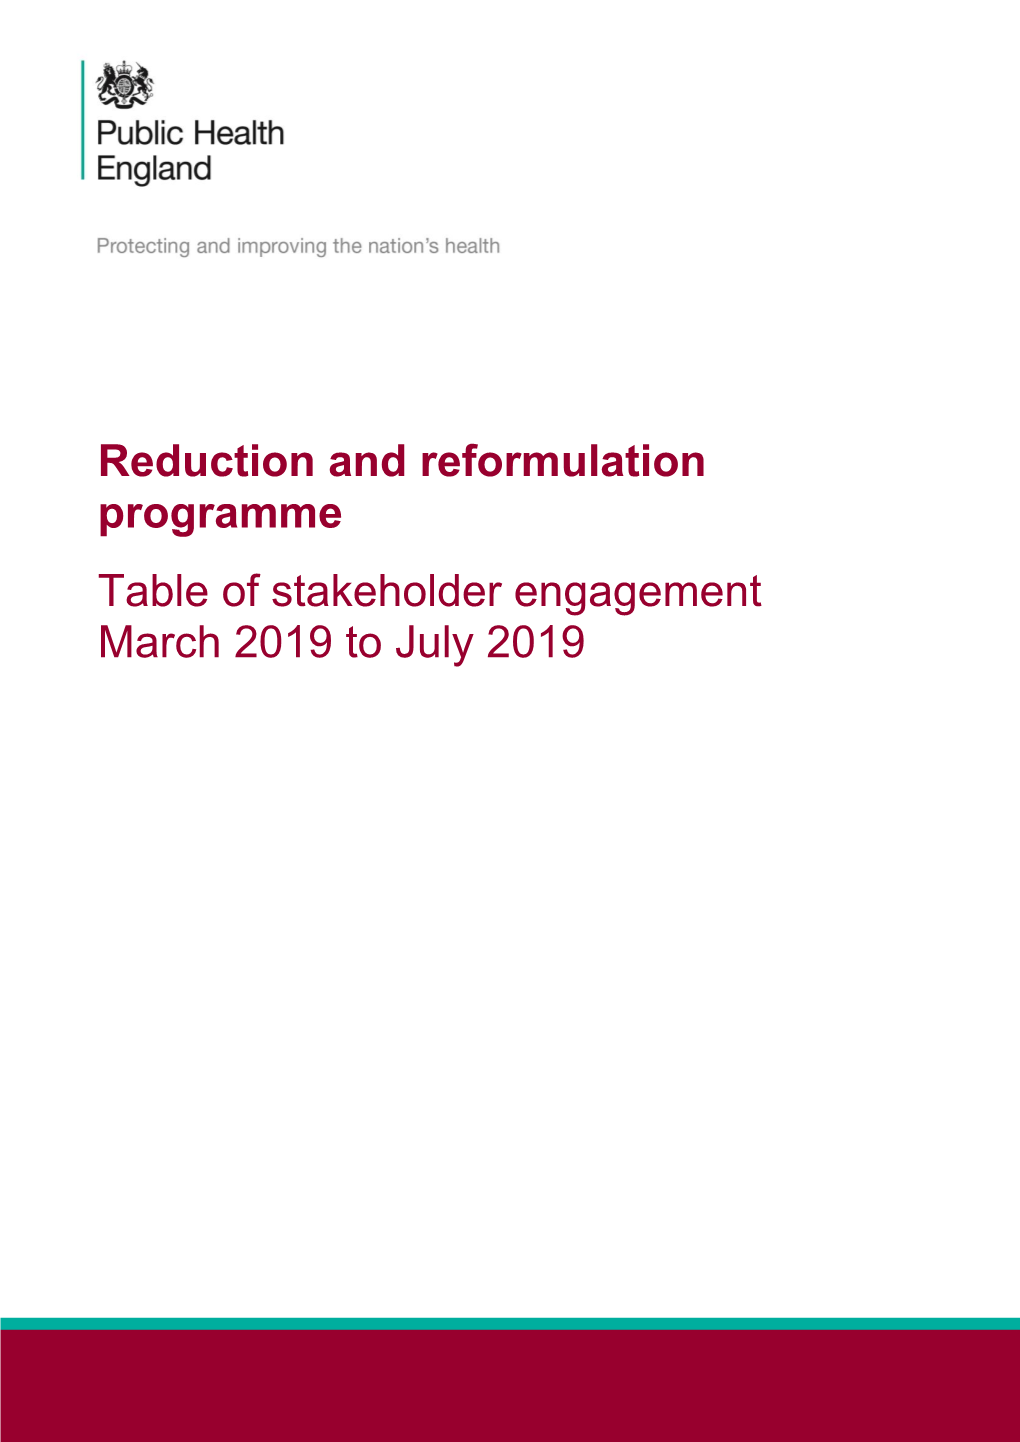 Table of Stakeholder Engagement March 2019 to July 2019